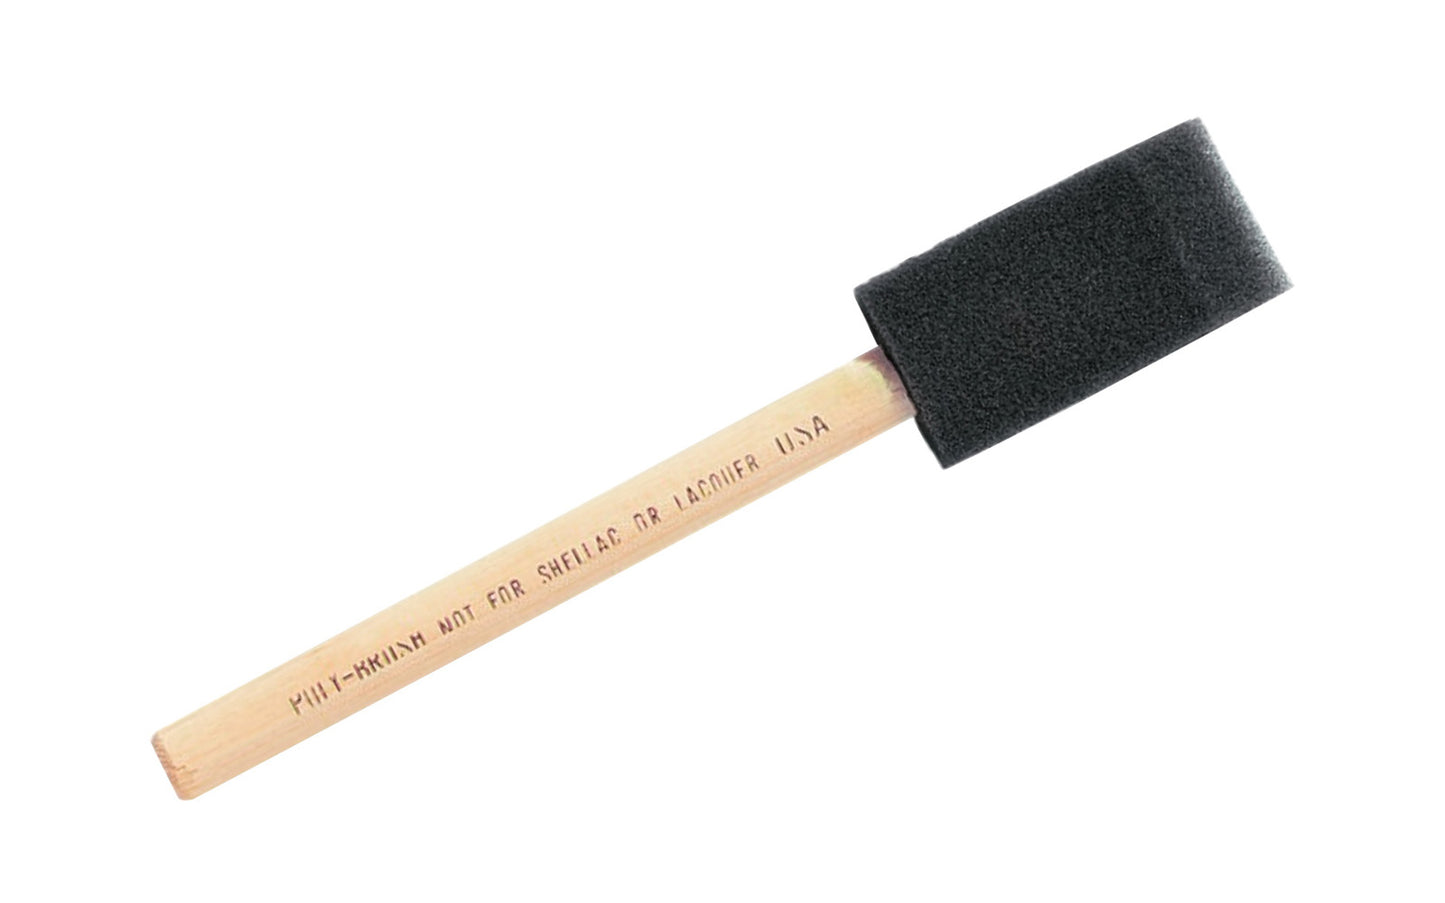 1" Poly Foam Brush with Wood Handle is an inexpensive, throw-away applicators that are ideal for application of enamel, latex, stain, oil paints, & varnish. Not for use with lacquer or shellac. Foam brushes leave no brush marks or loose bristles. Throw away foam brush. 1" wide brush. 082826000051. Jen Mfg. Made in USA